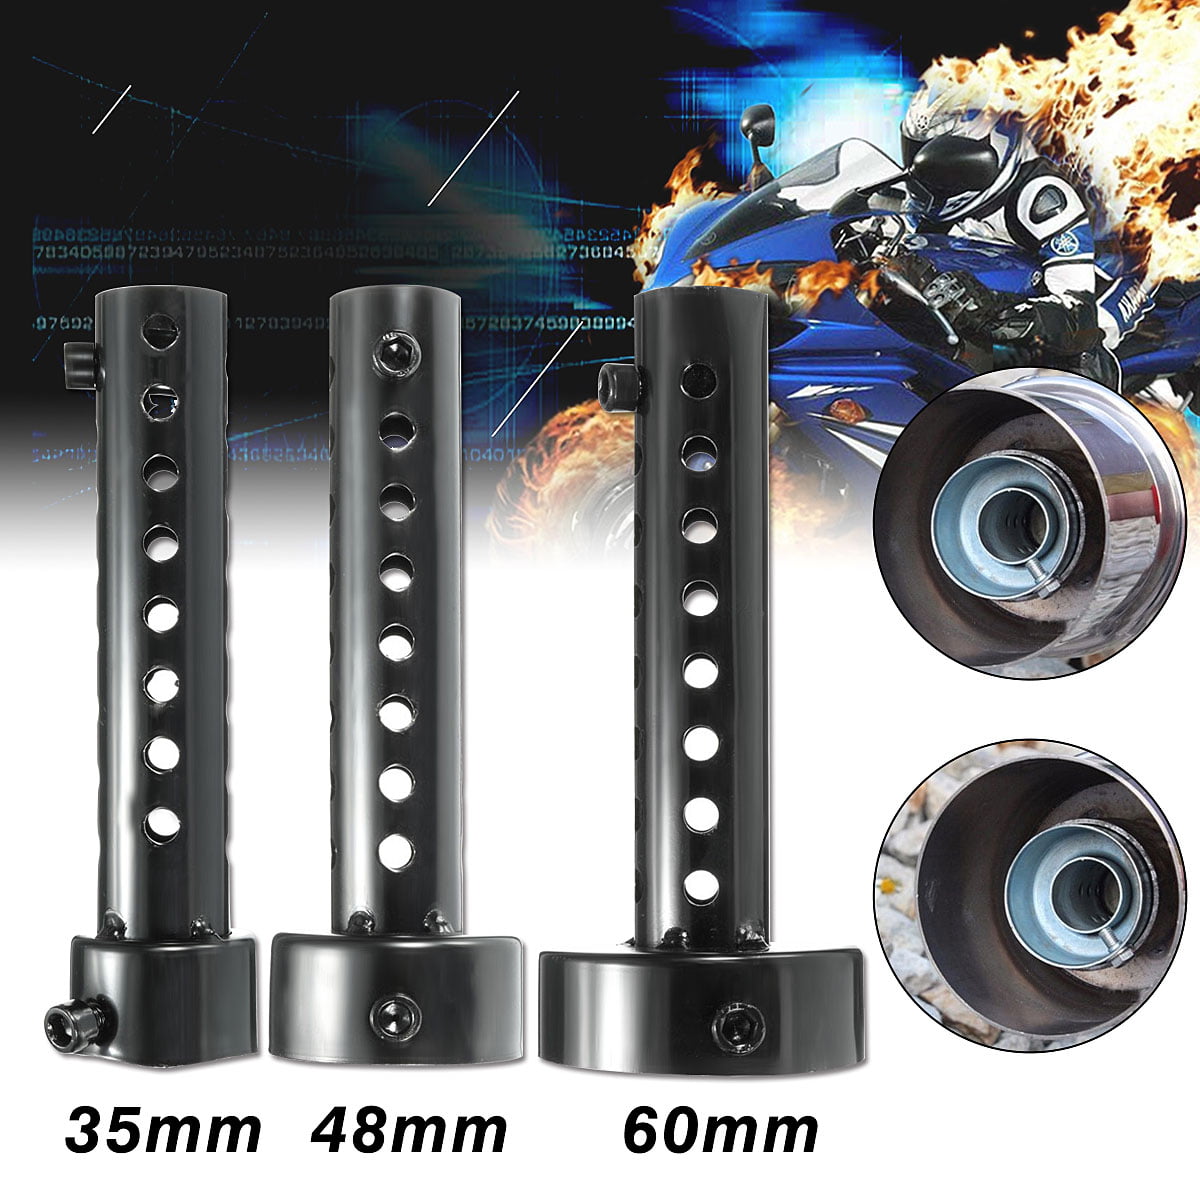 Details about   Universal Motorcycle Exhaust Can Muffler Baffle DB Killer Silencer 35mm US J hp